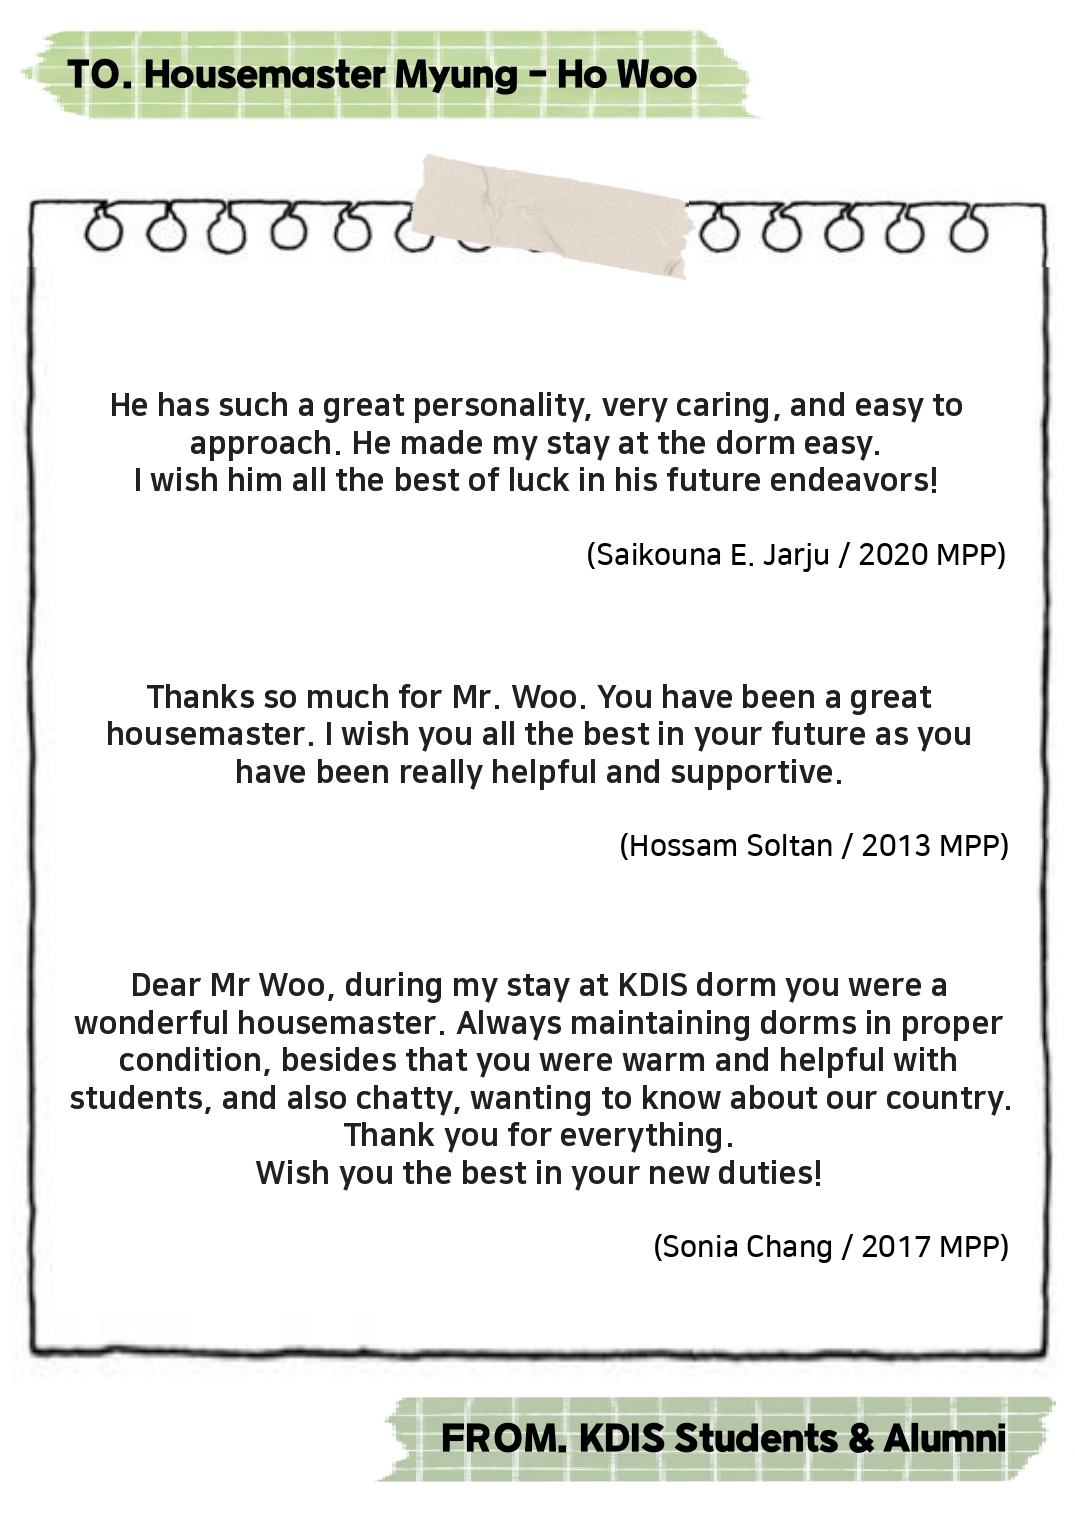 Thank you Housemaster Myung-ho Woo -Messages from KDIS Students and Alumni 사진29